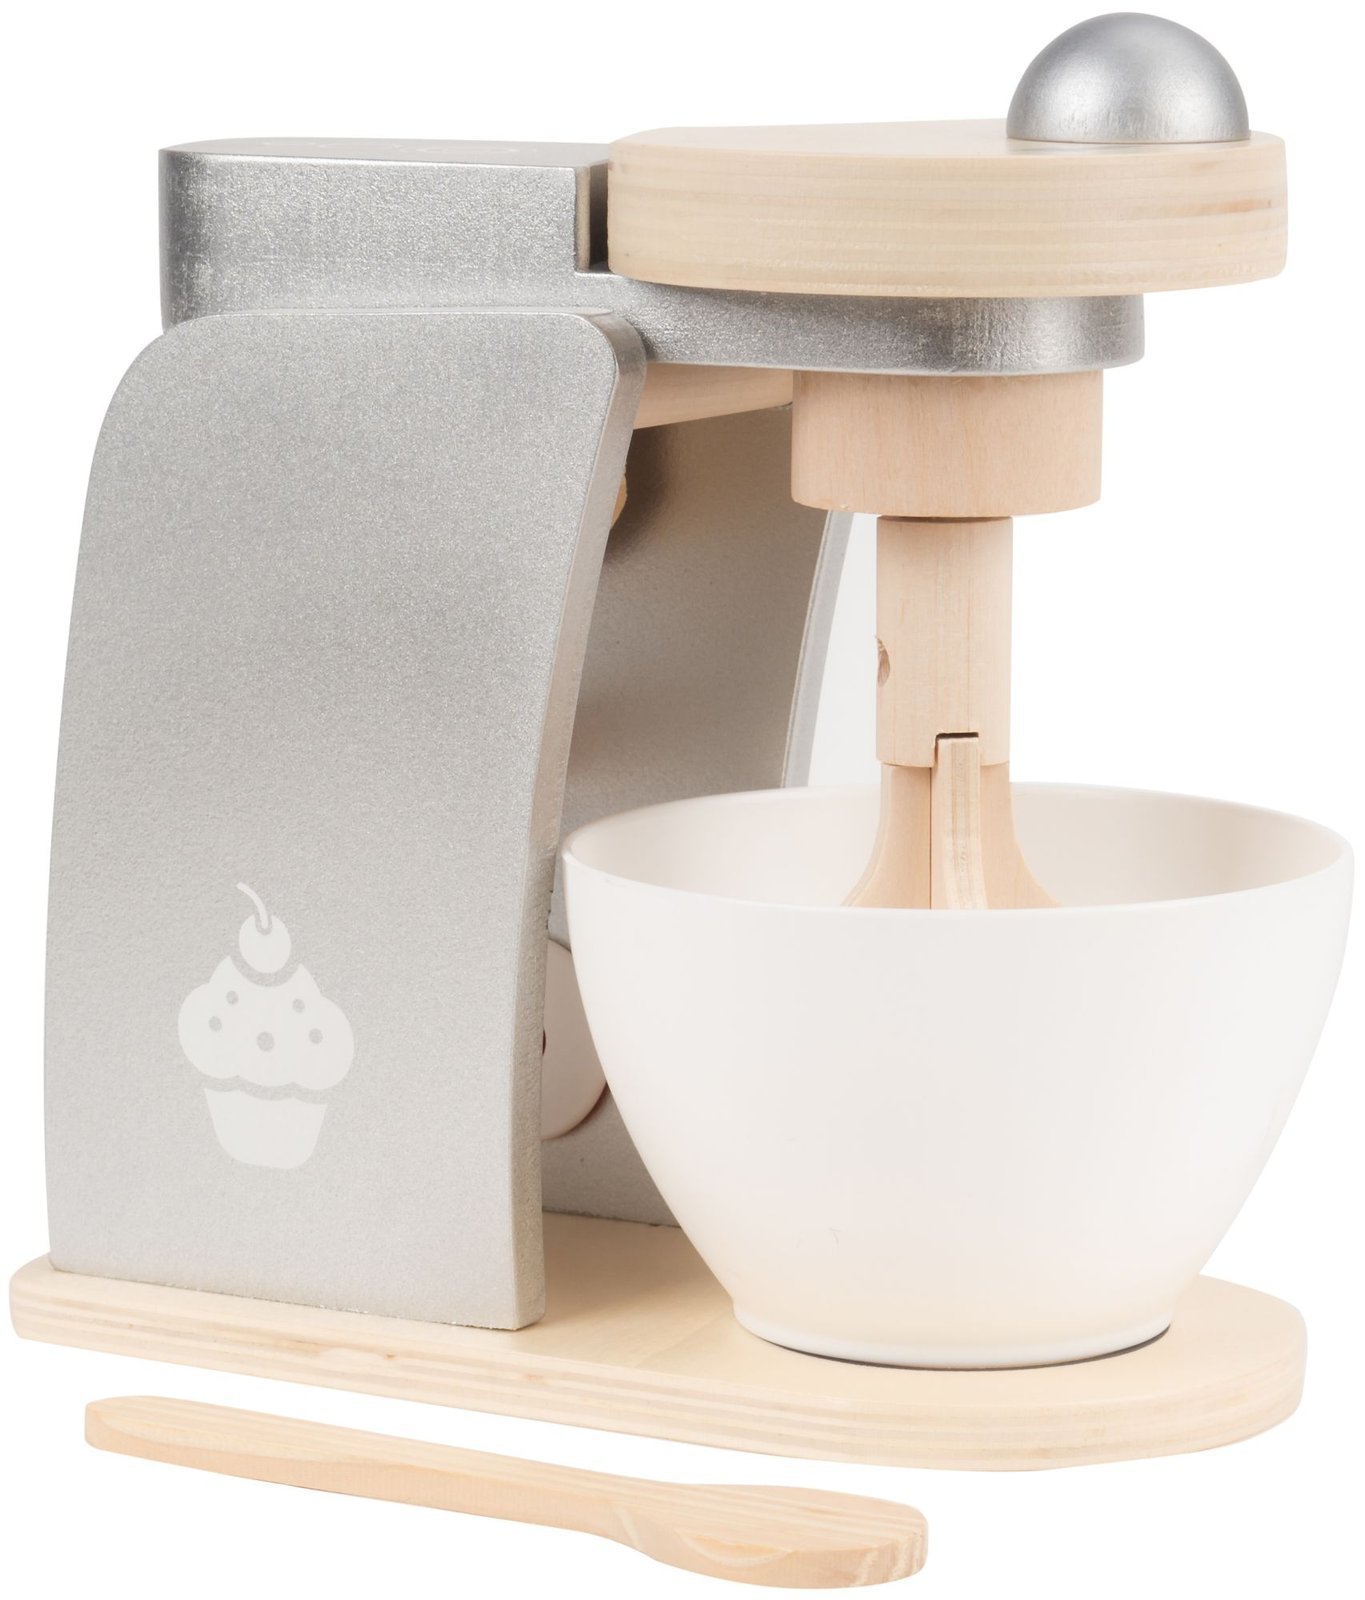 Wooden mixer with a bowl, kneading robot